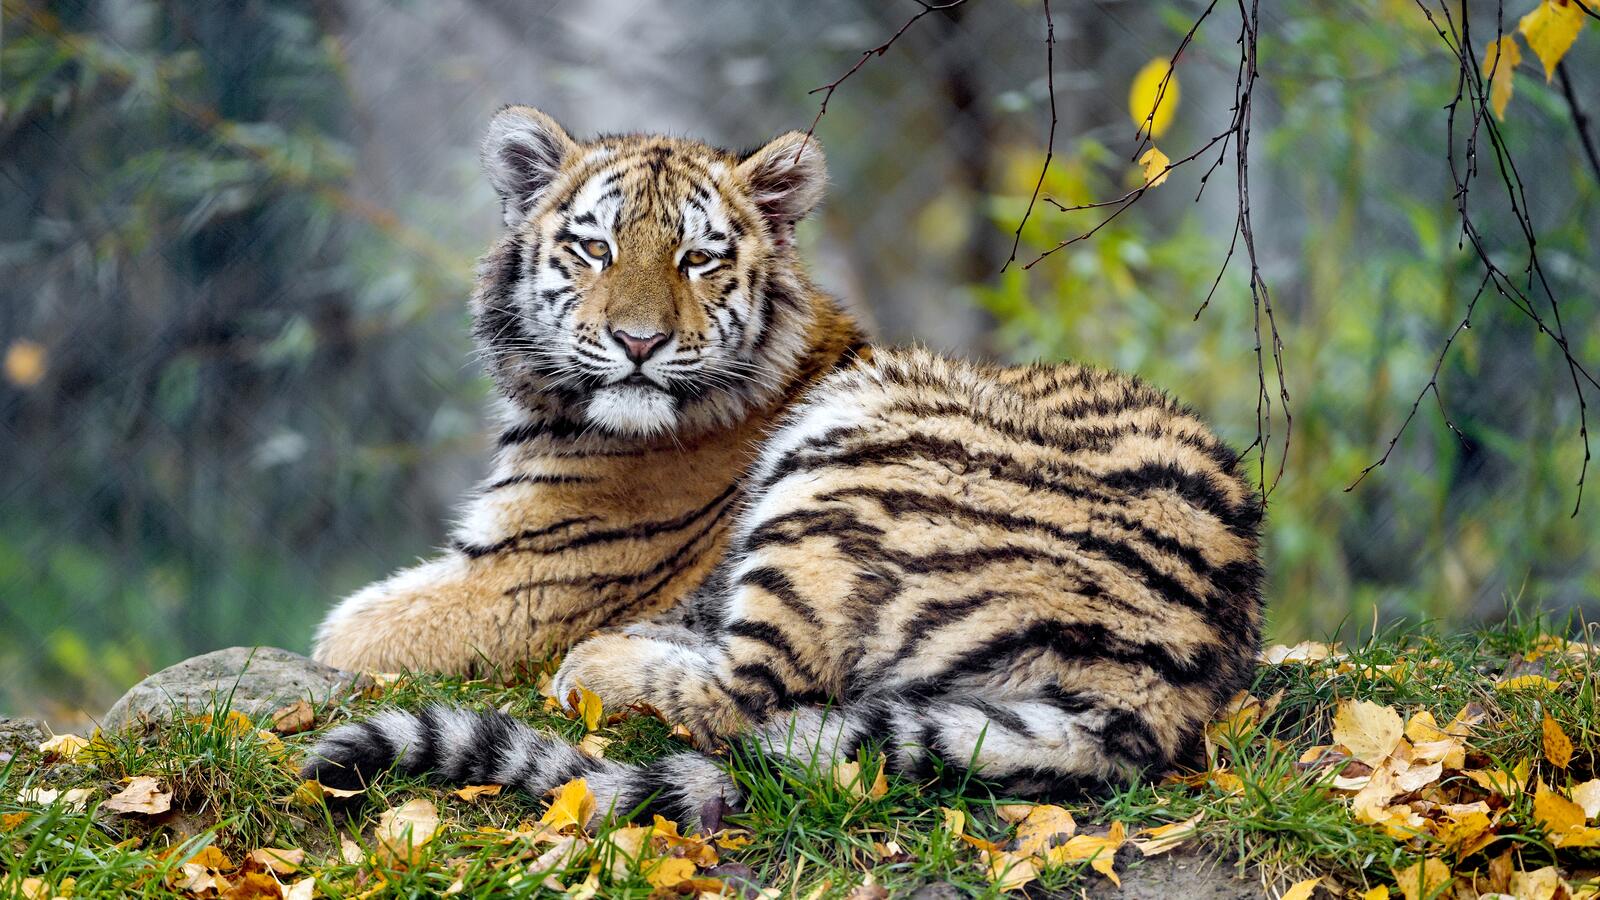 Free photo A little tiger cub lies on the grass with fallen leaves